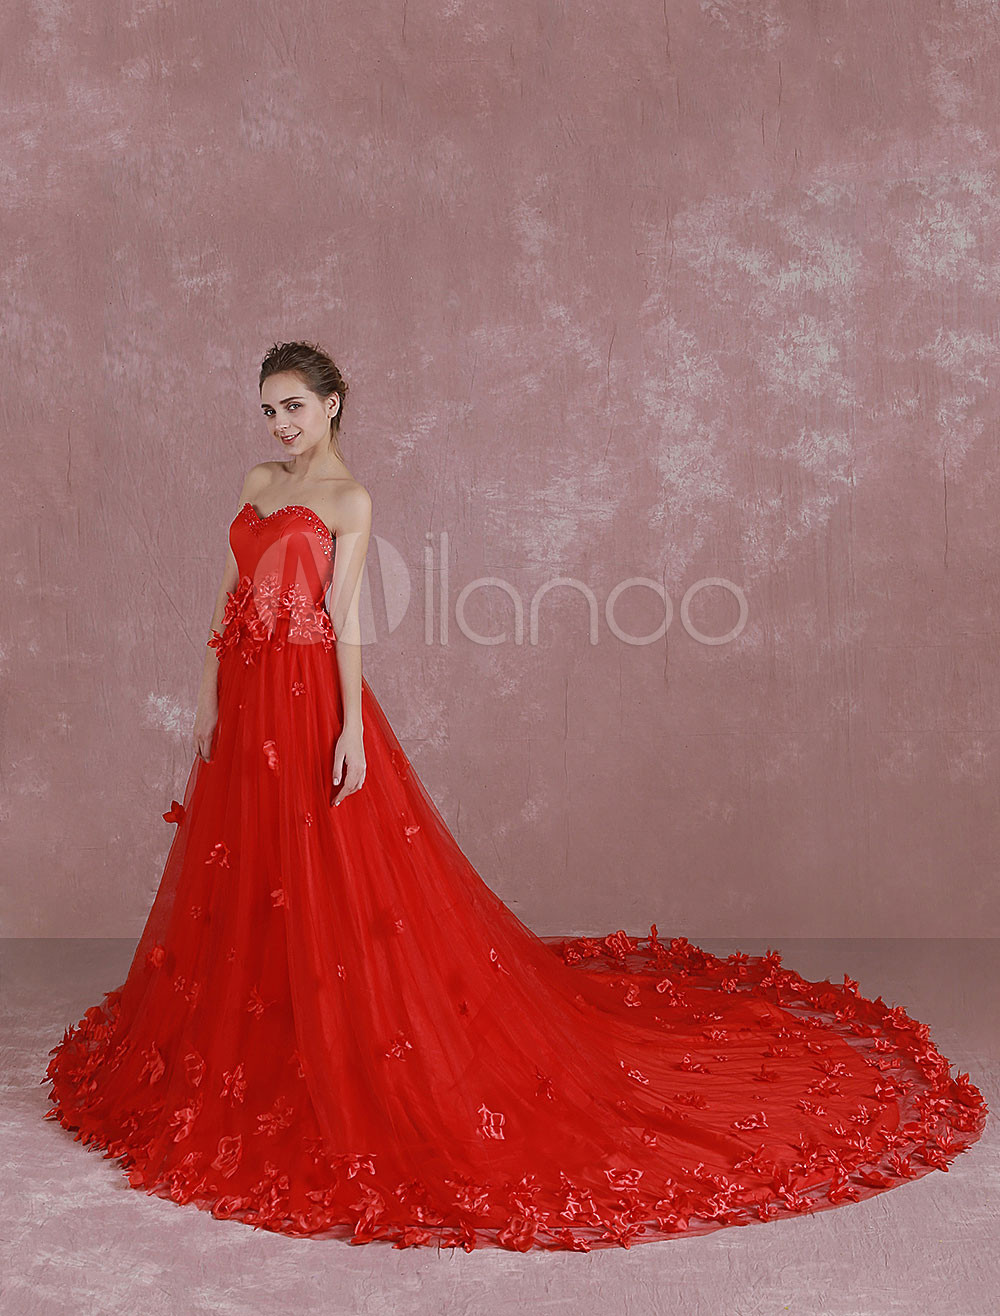 Red Wedding Dress Sweetheart Strapless Sequin Bridal Dress 3D Flowers Applique A Line Cathedral Train Evening Dress photo